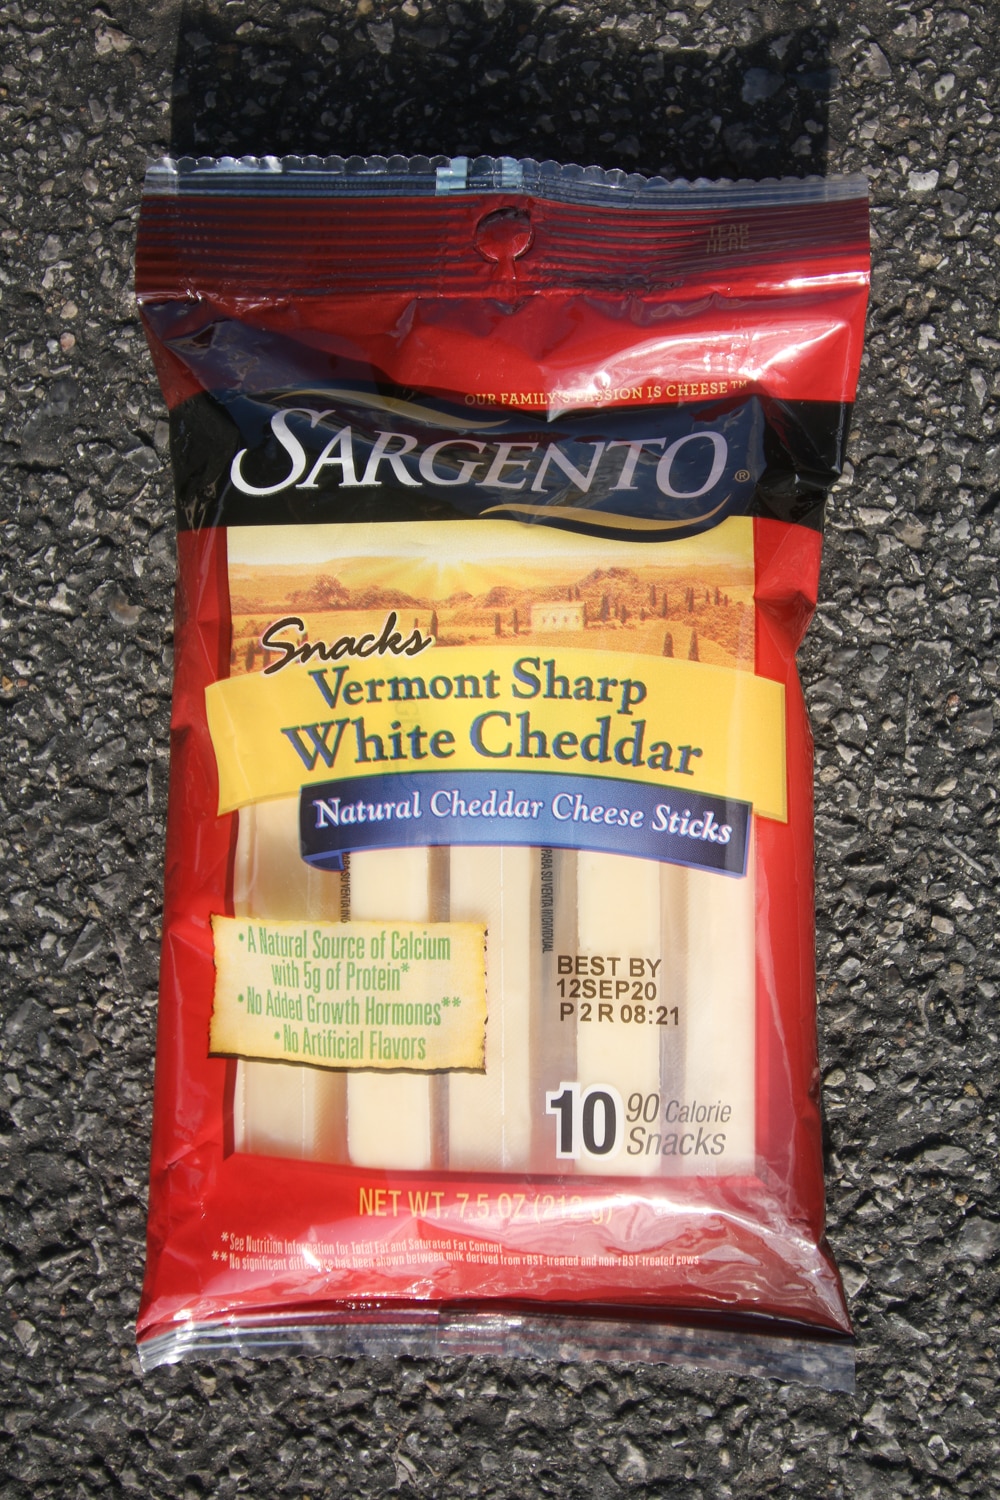 A package of white cheddar cheese sticks.